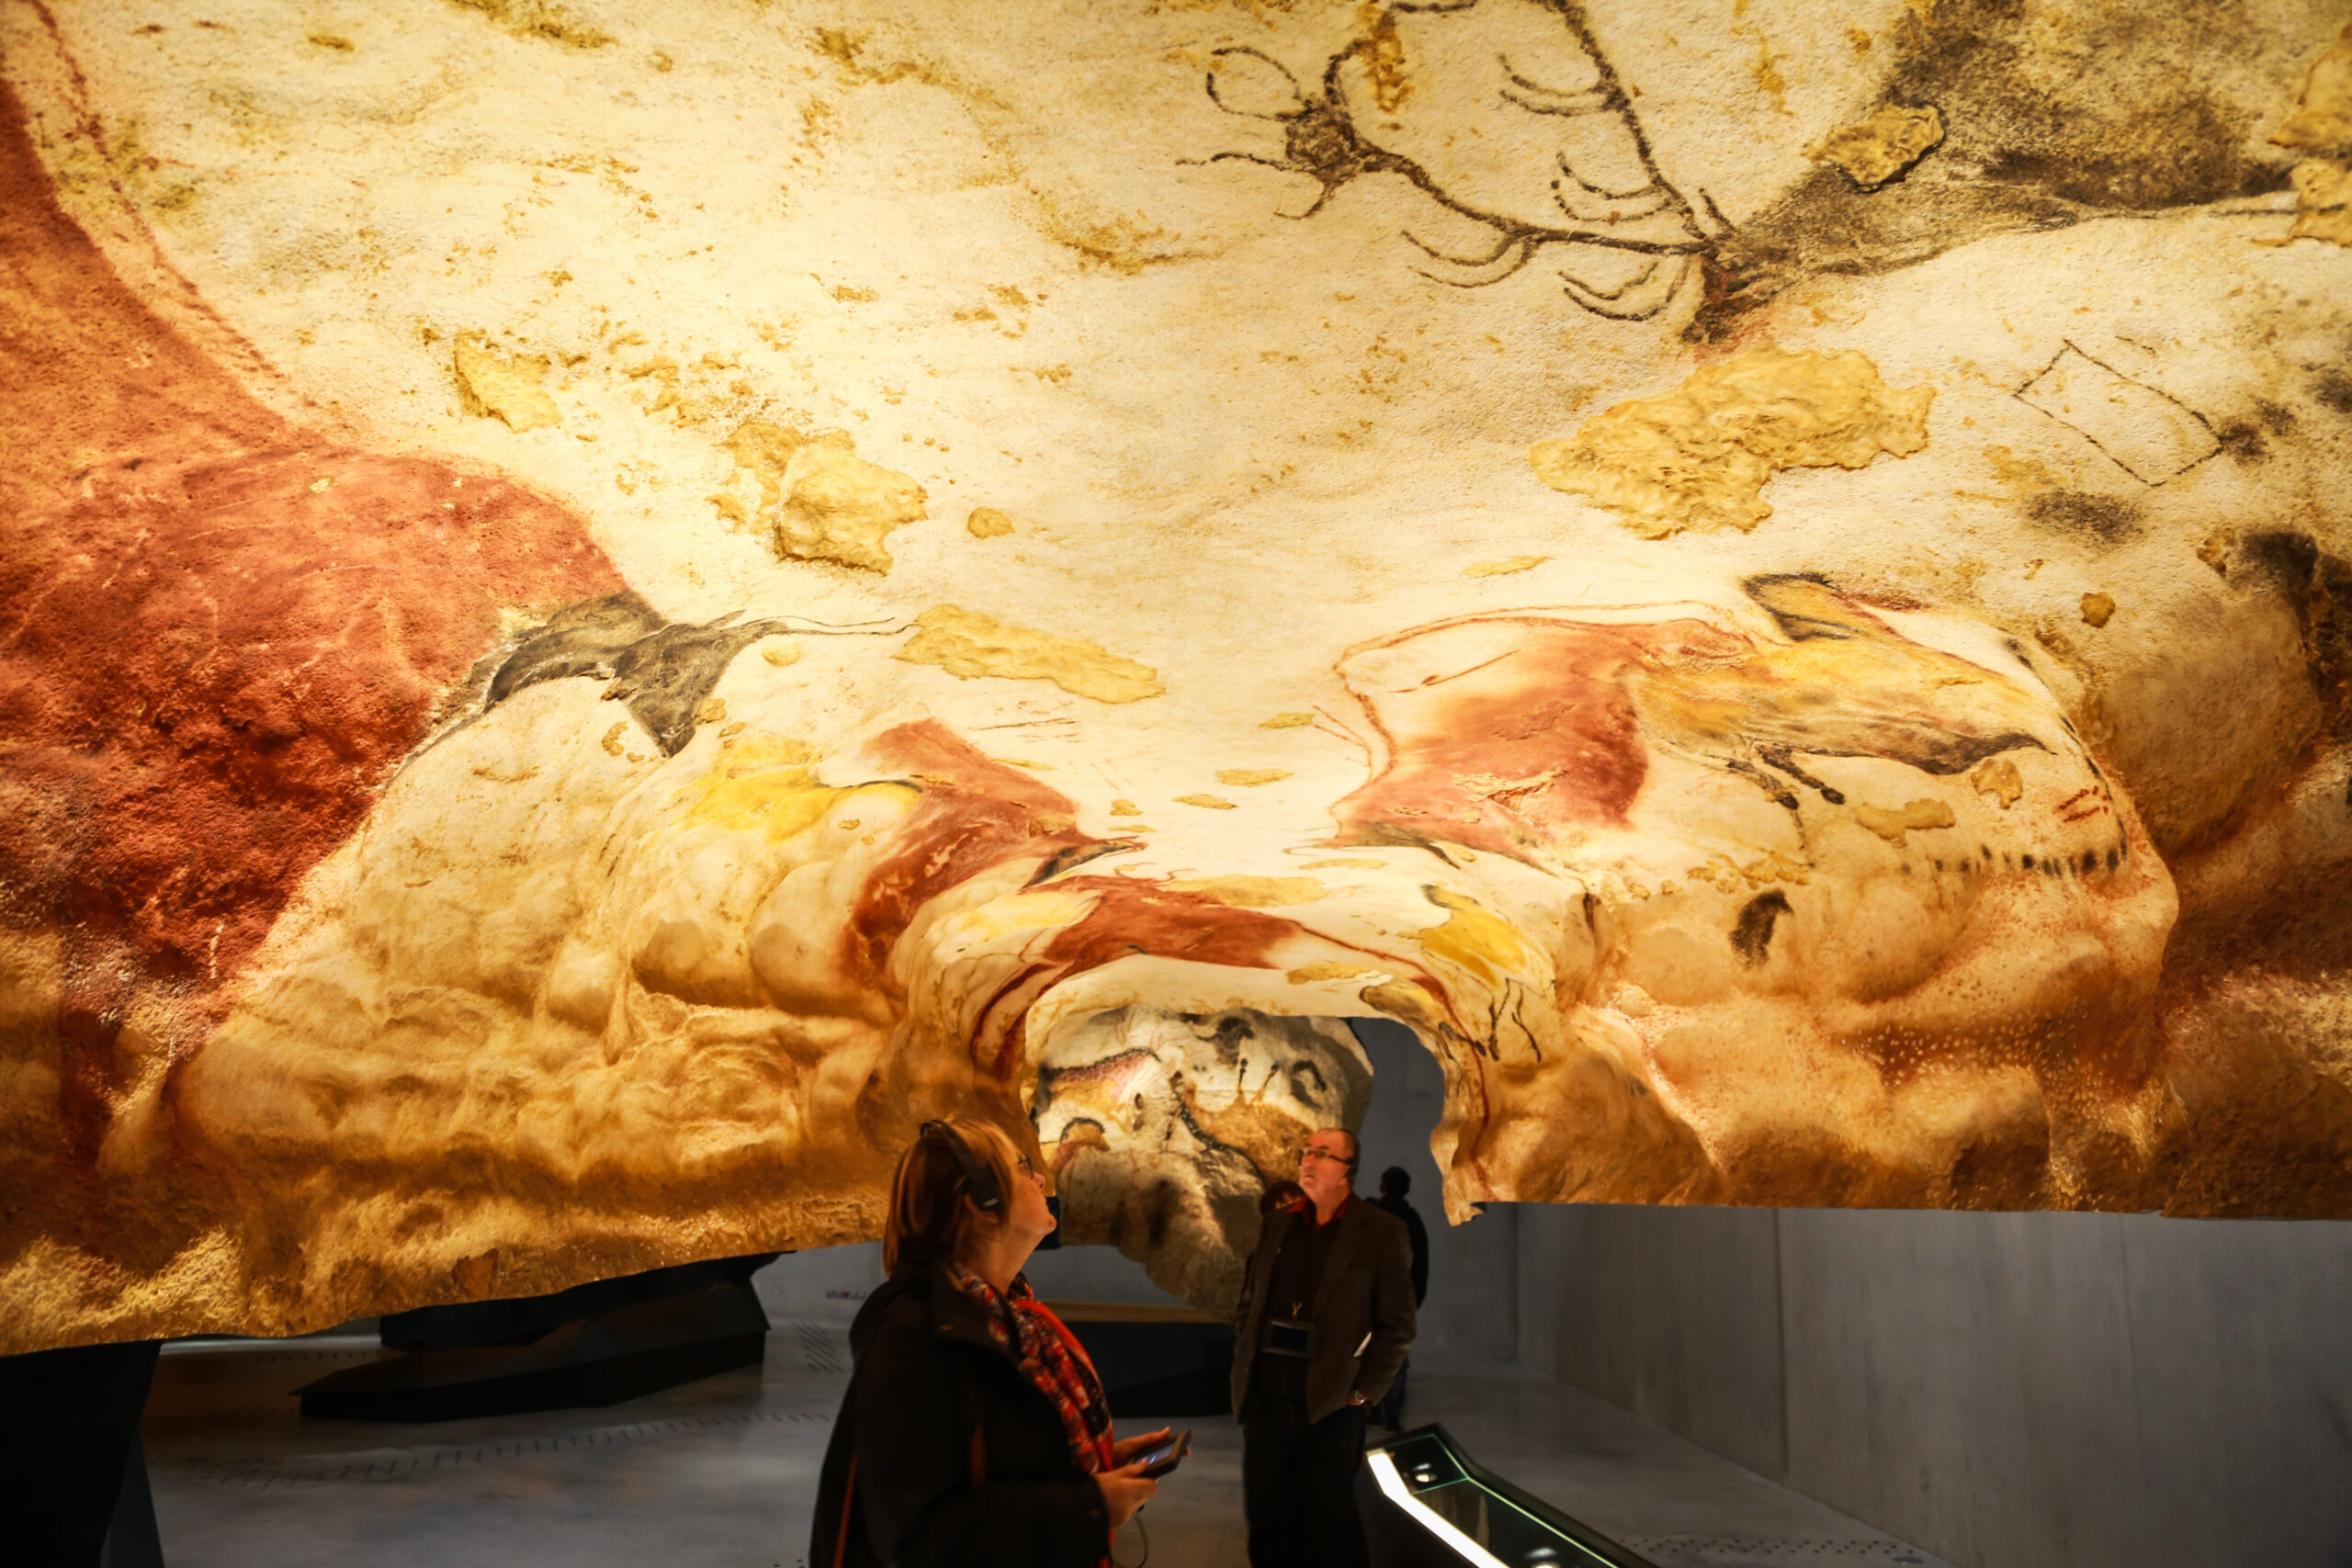 <p><span>This UNESCO World Heritage Site contains some of the world’s most famous prehistoric cave paintings. Public access is limited to a small number of visitors per day to protect the delicate paintings from damage.</span></p>